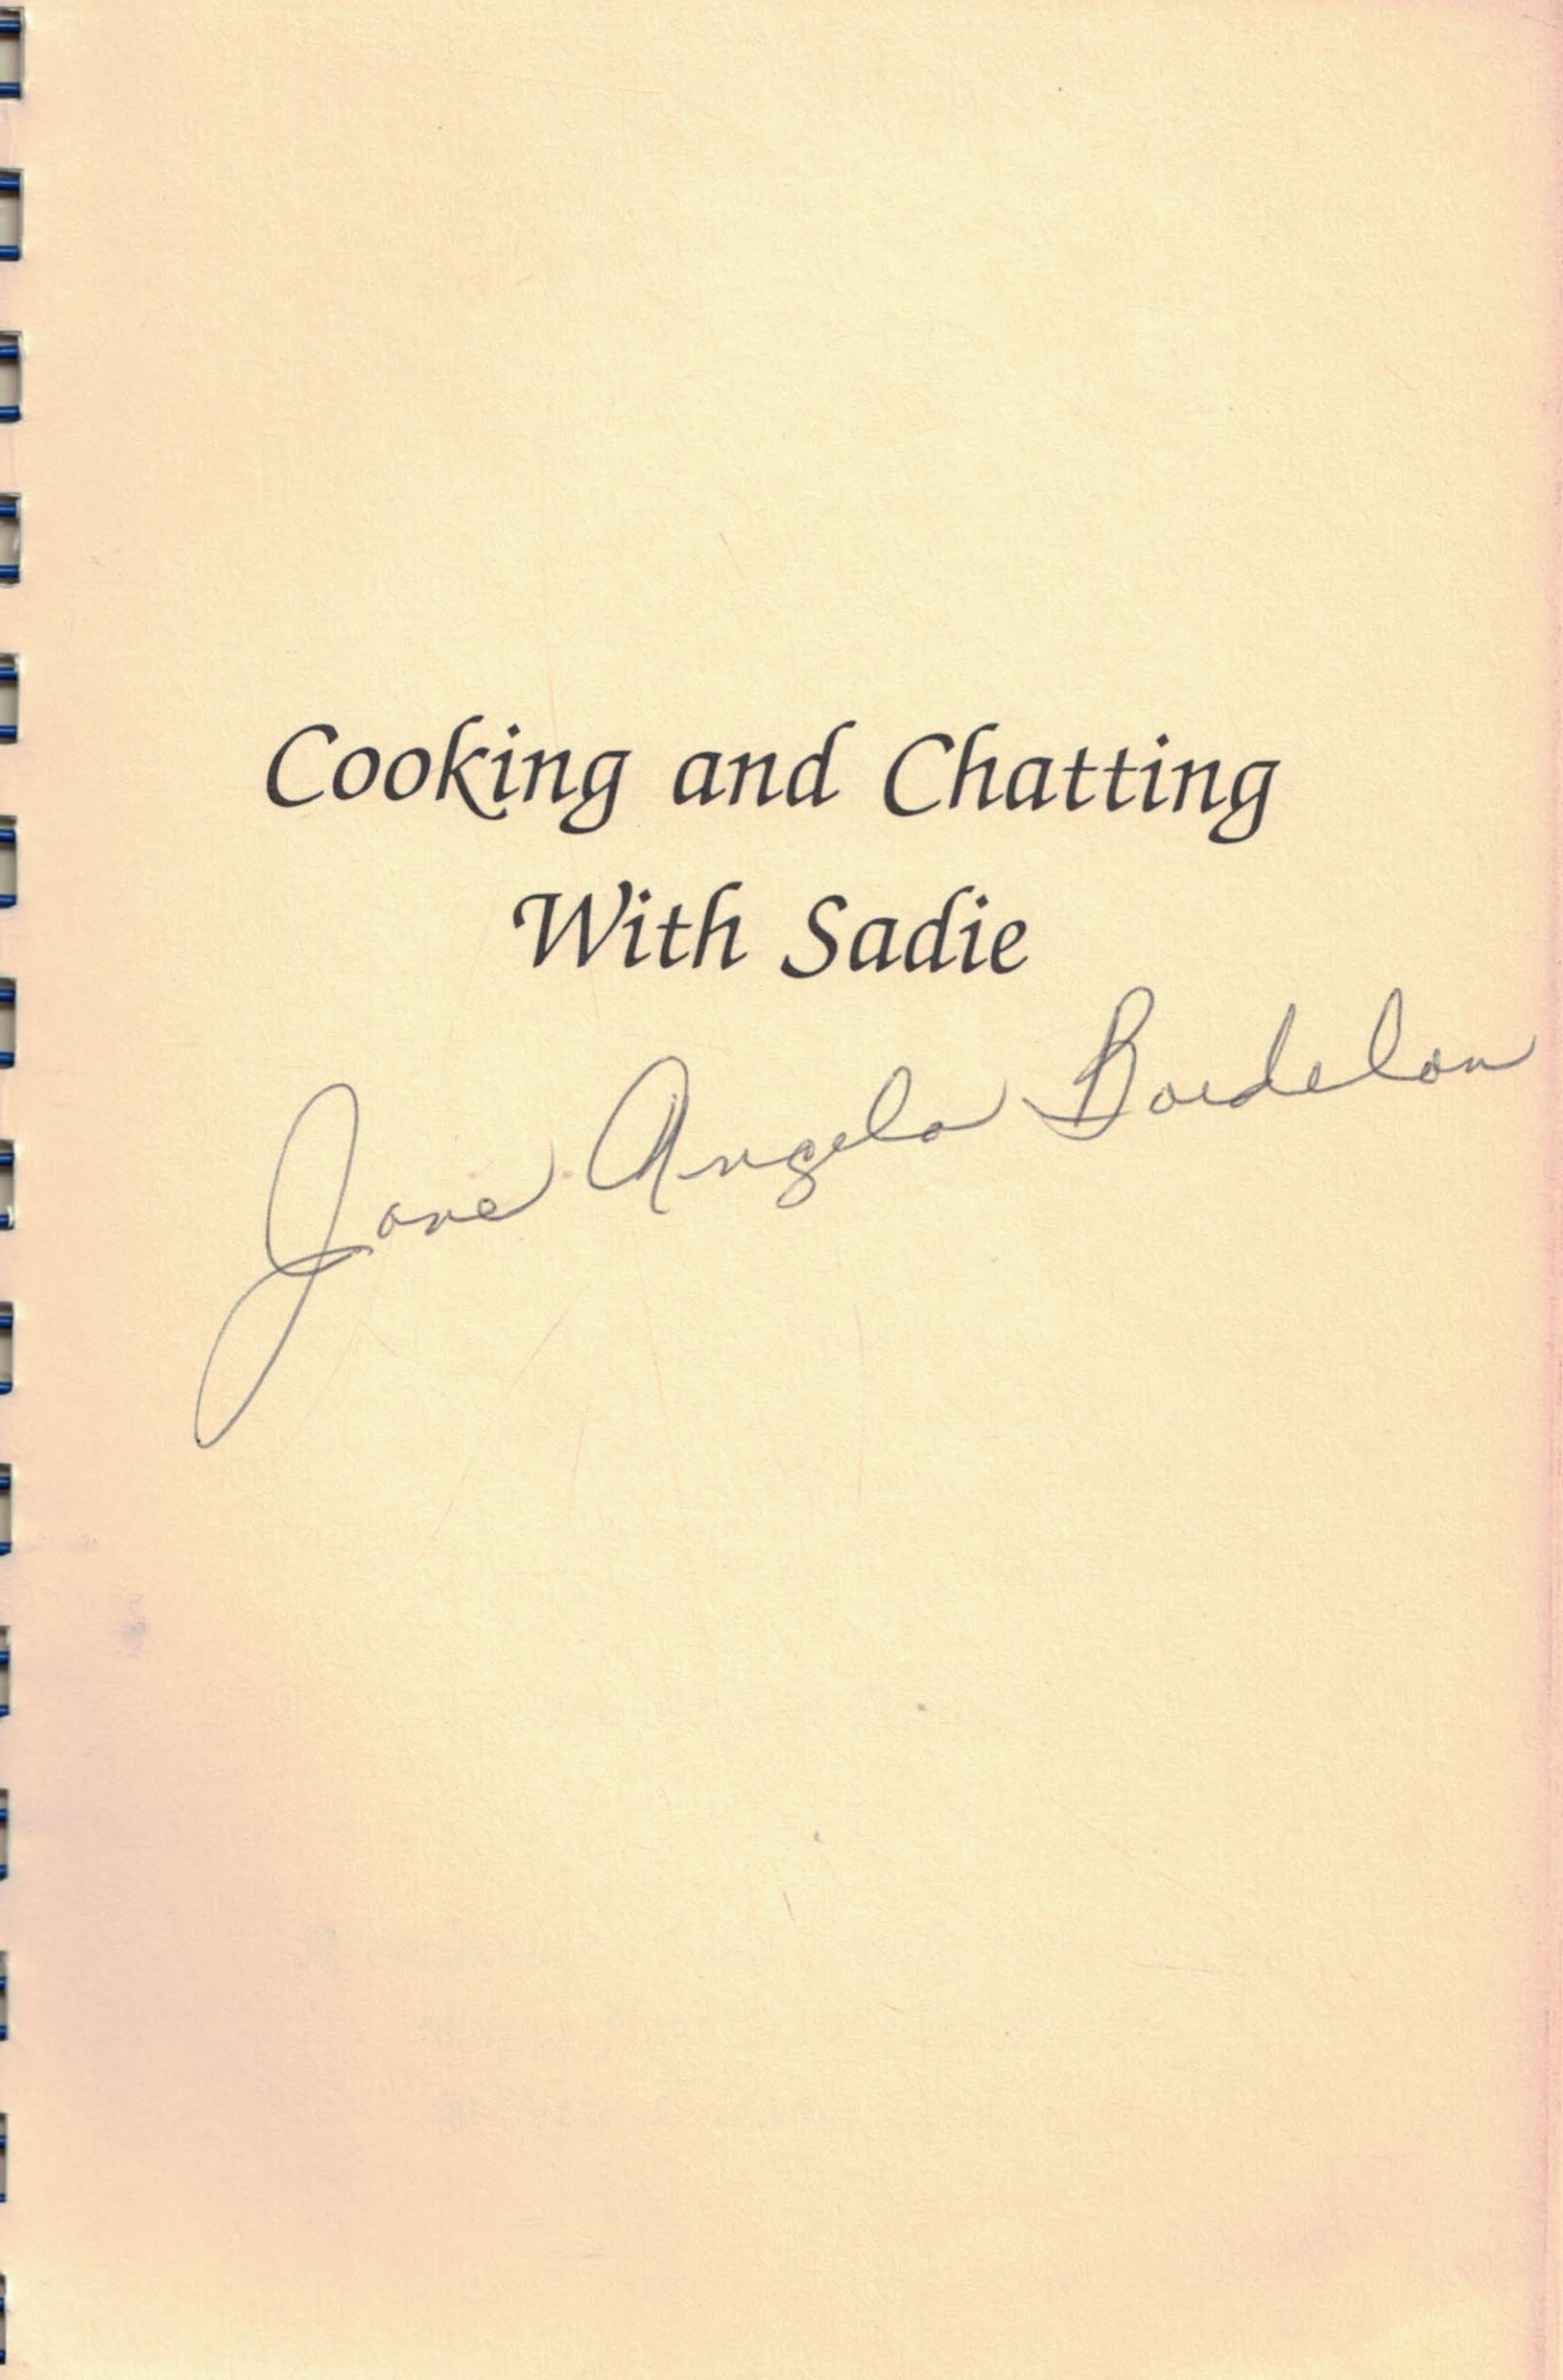 Cooking and Chatting with Sadie. Signed copy.